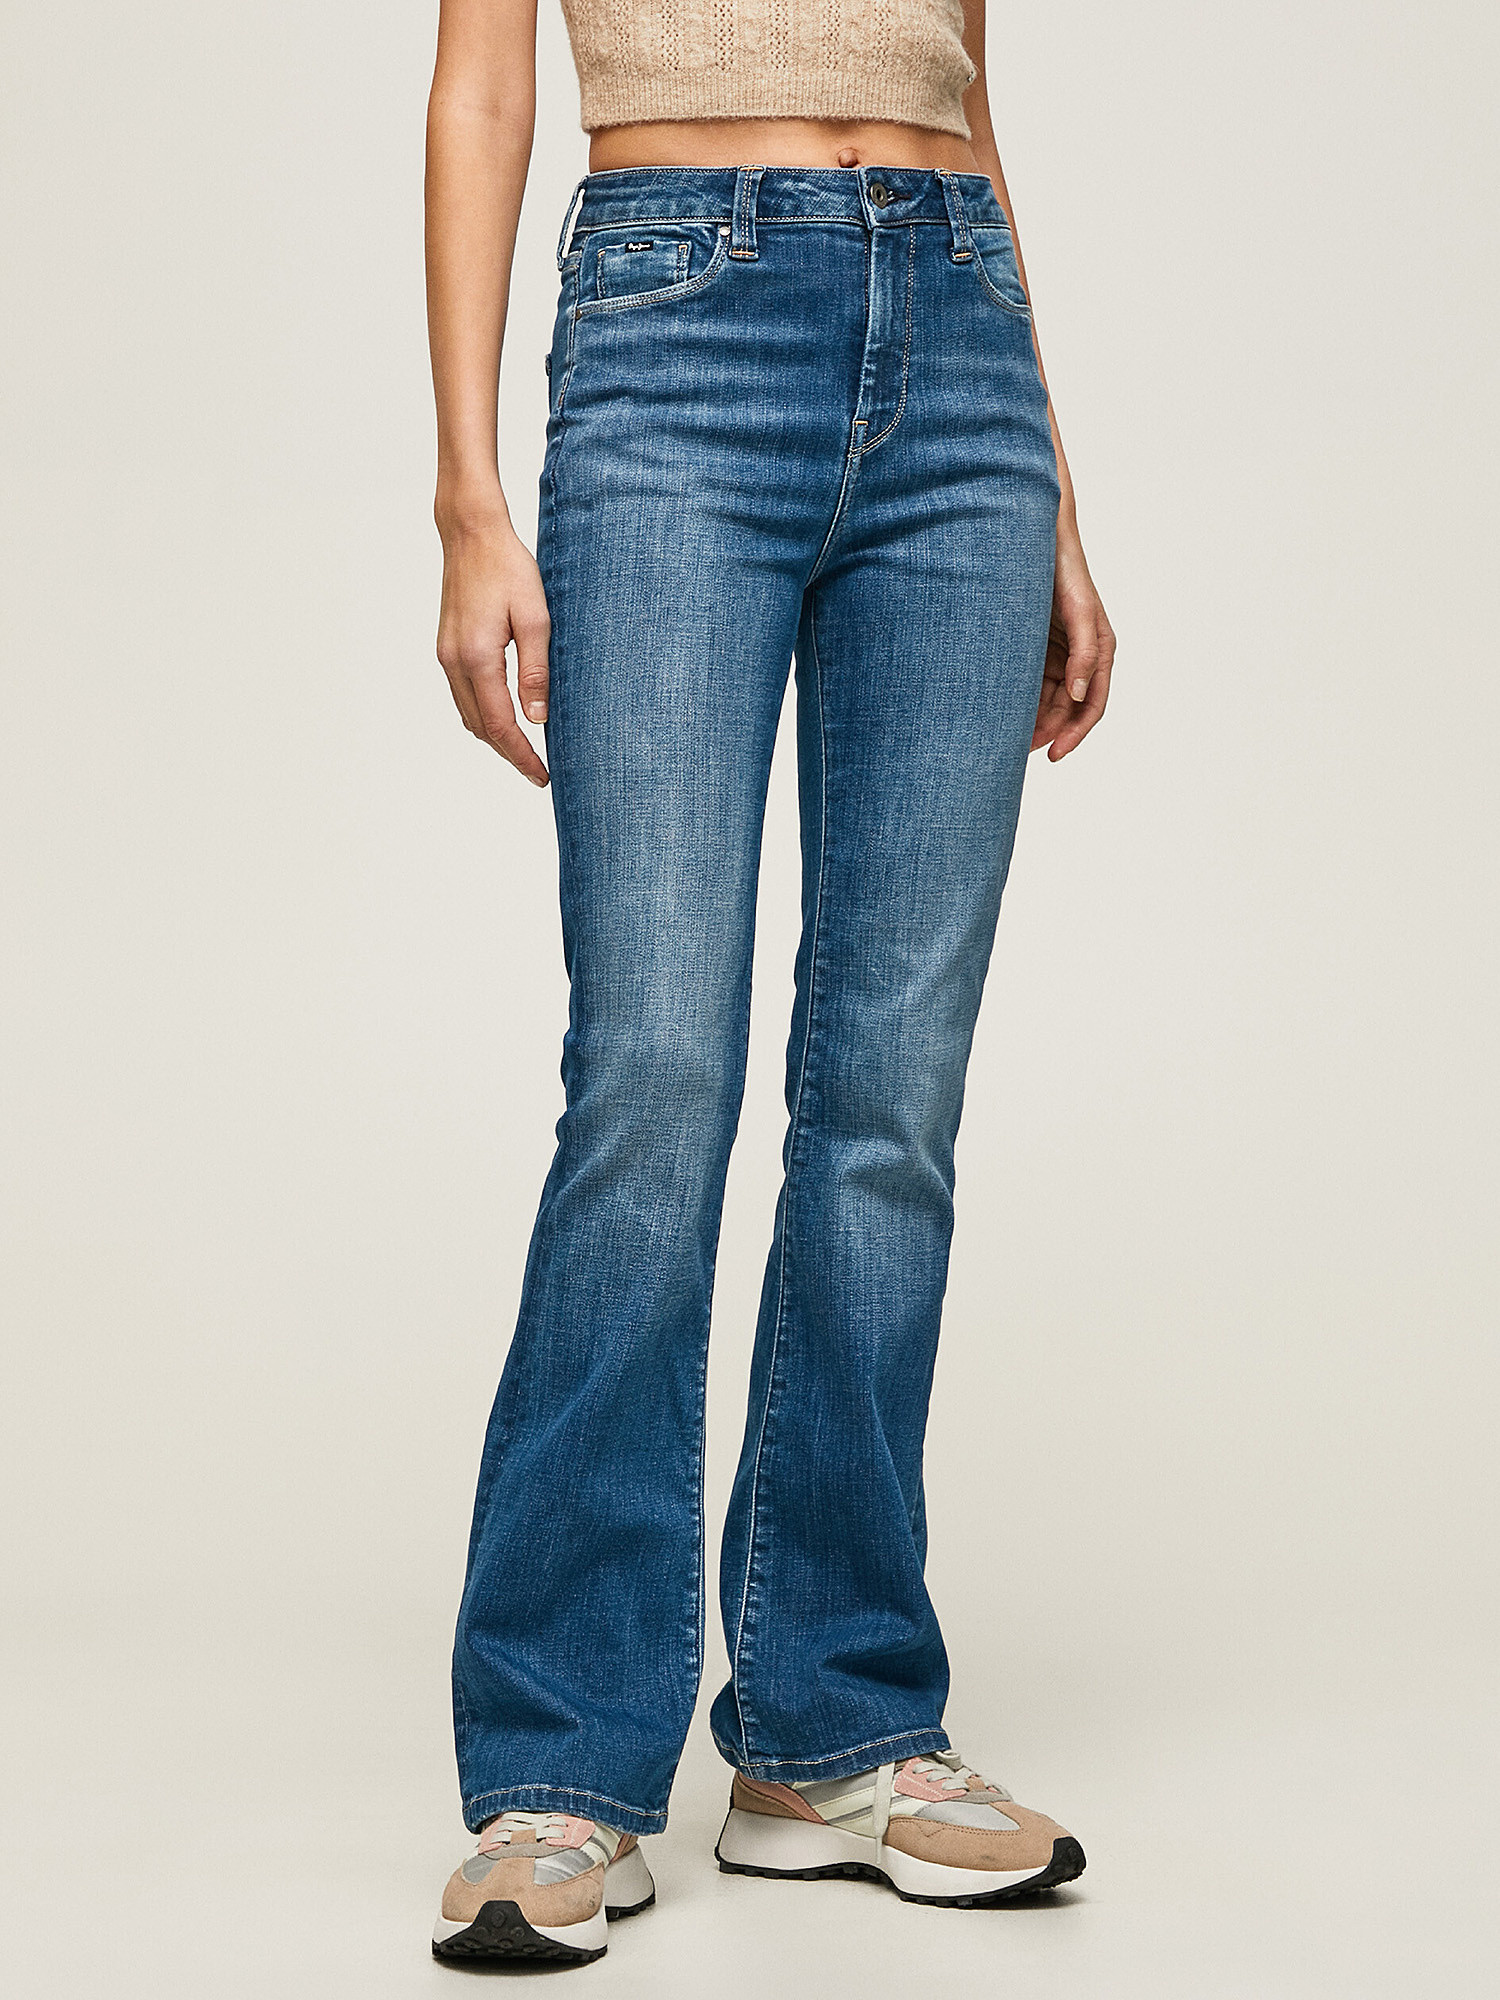 Pepe Jeans - Bootcut jeans, Denim, large image number 2